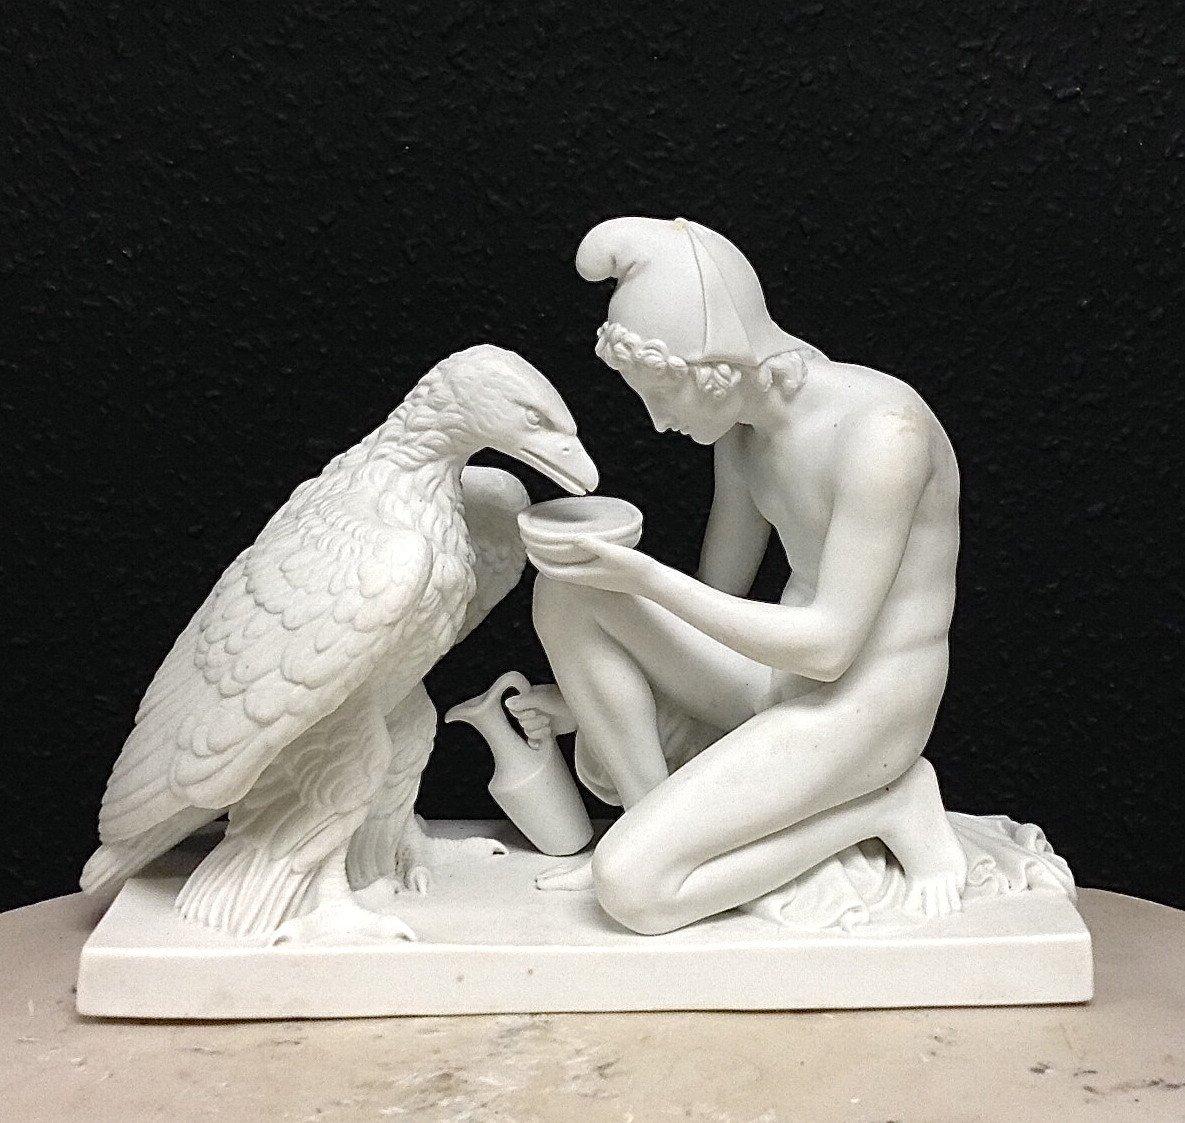 A stunning Ganymede and the eagle marble bust sculpture, 20th century.
Ganymede and Jupitors Eagle, after the antique by Bertel Thorvaldsen, 1817.
His fascinating famous marble sculpture by Thorvaldsen of 1817, reproduced in miniature by